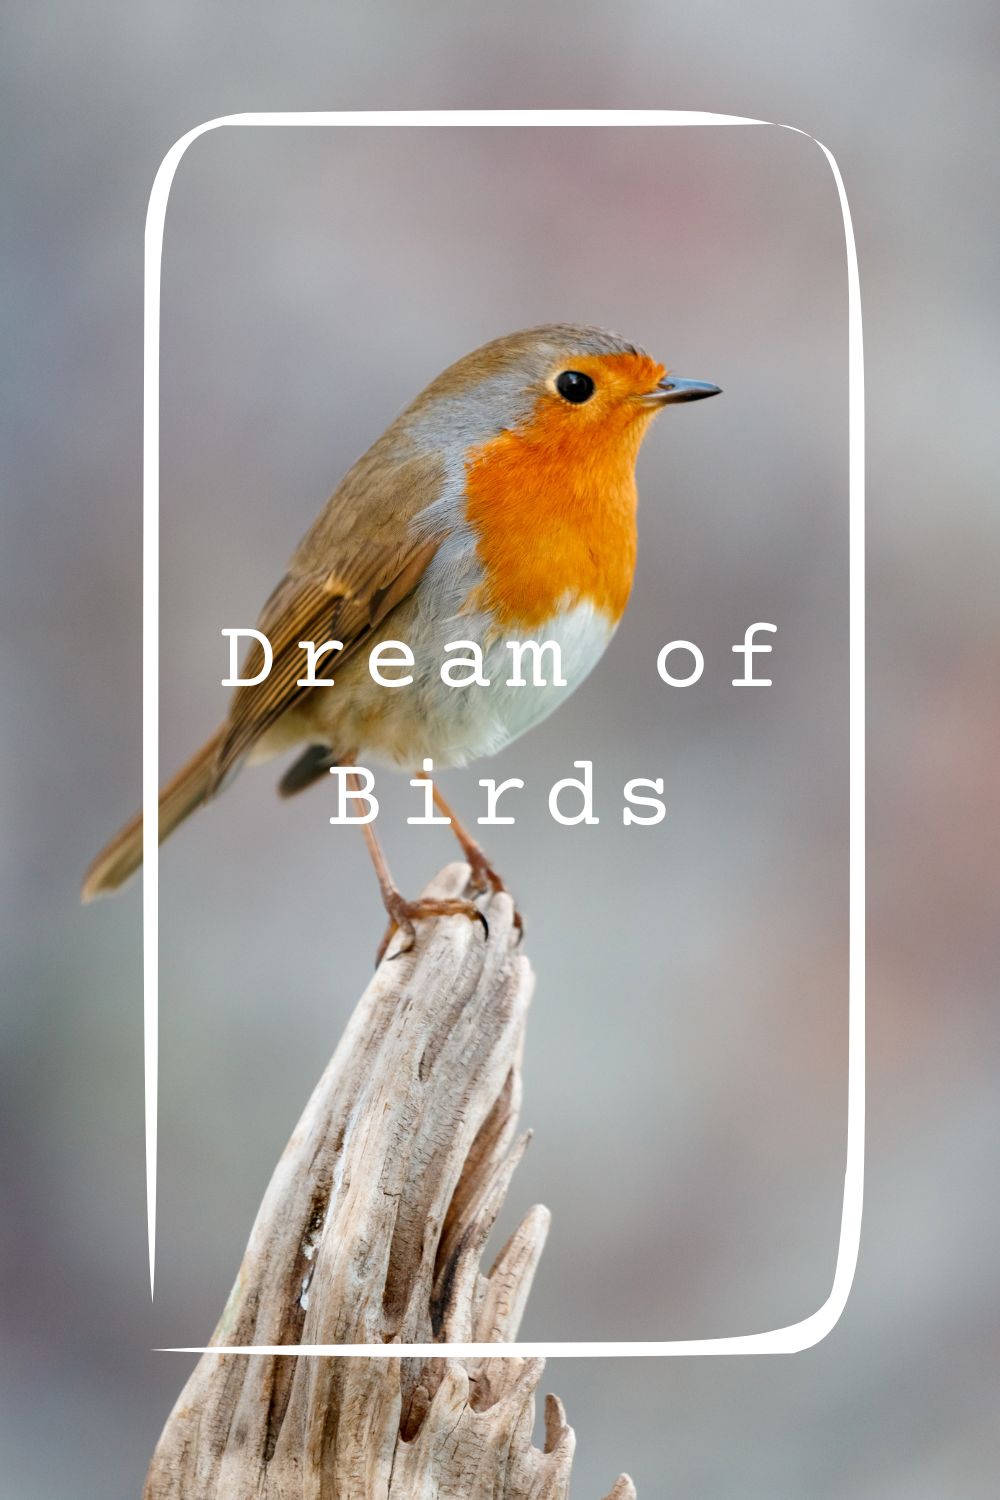 20 Dream of Birds Meanings1